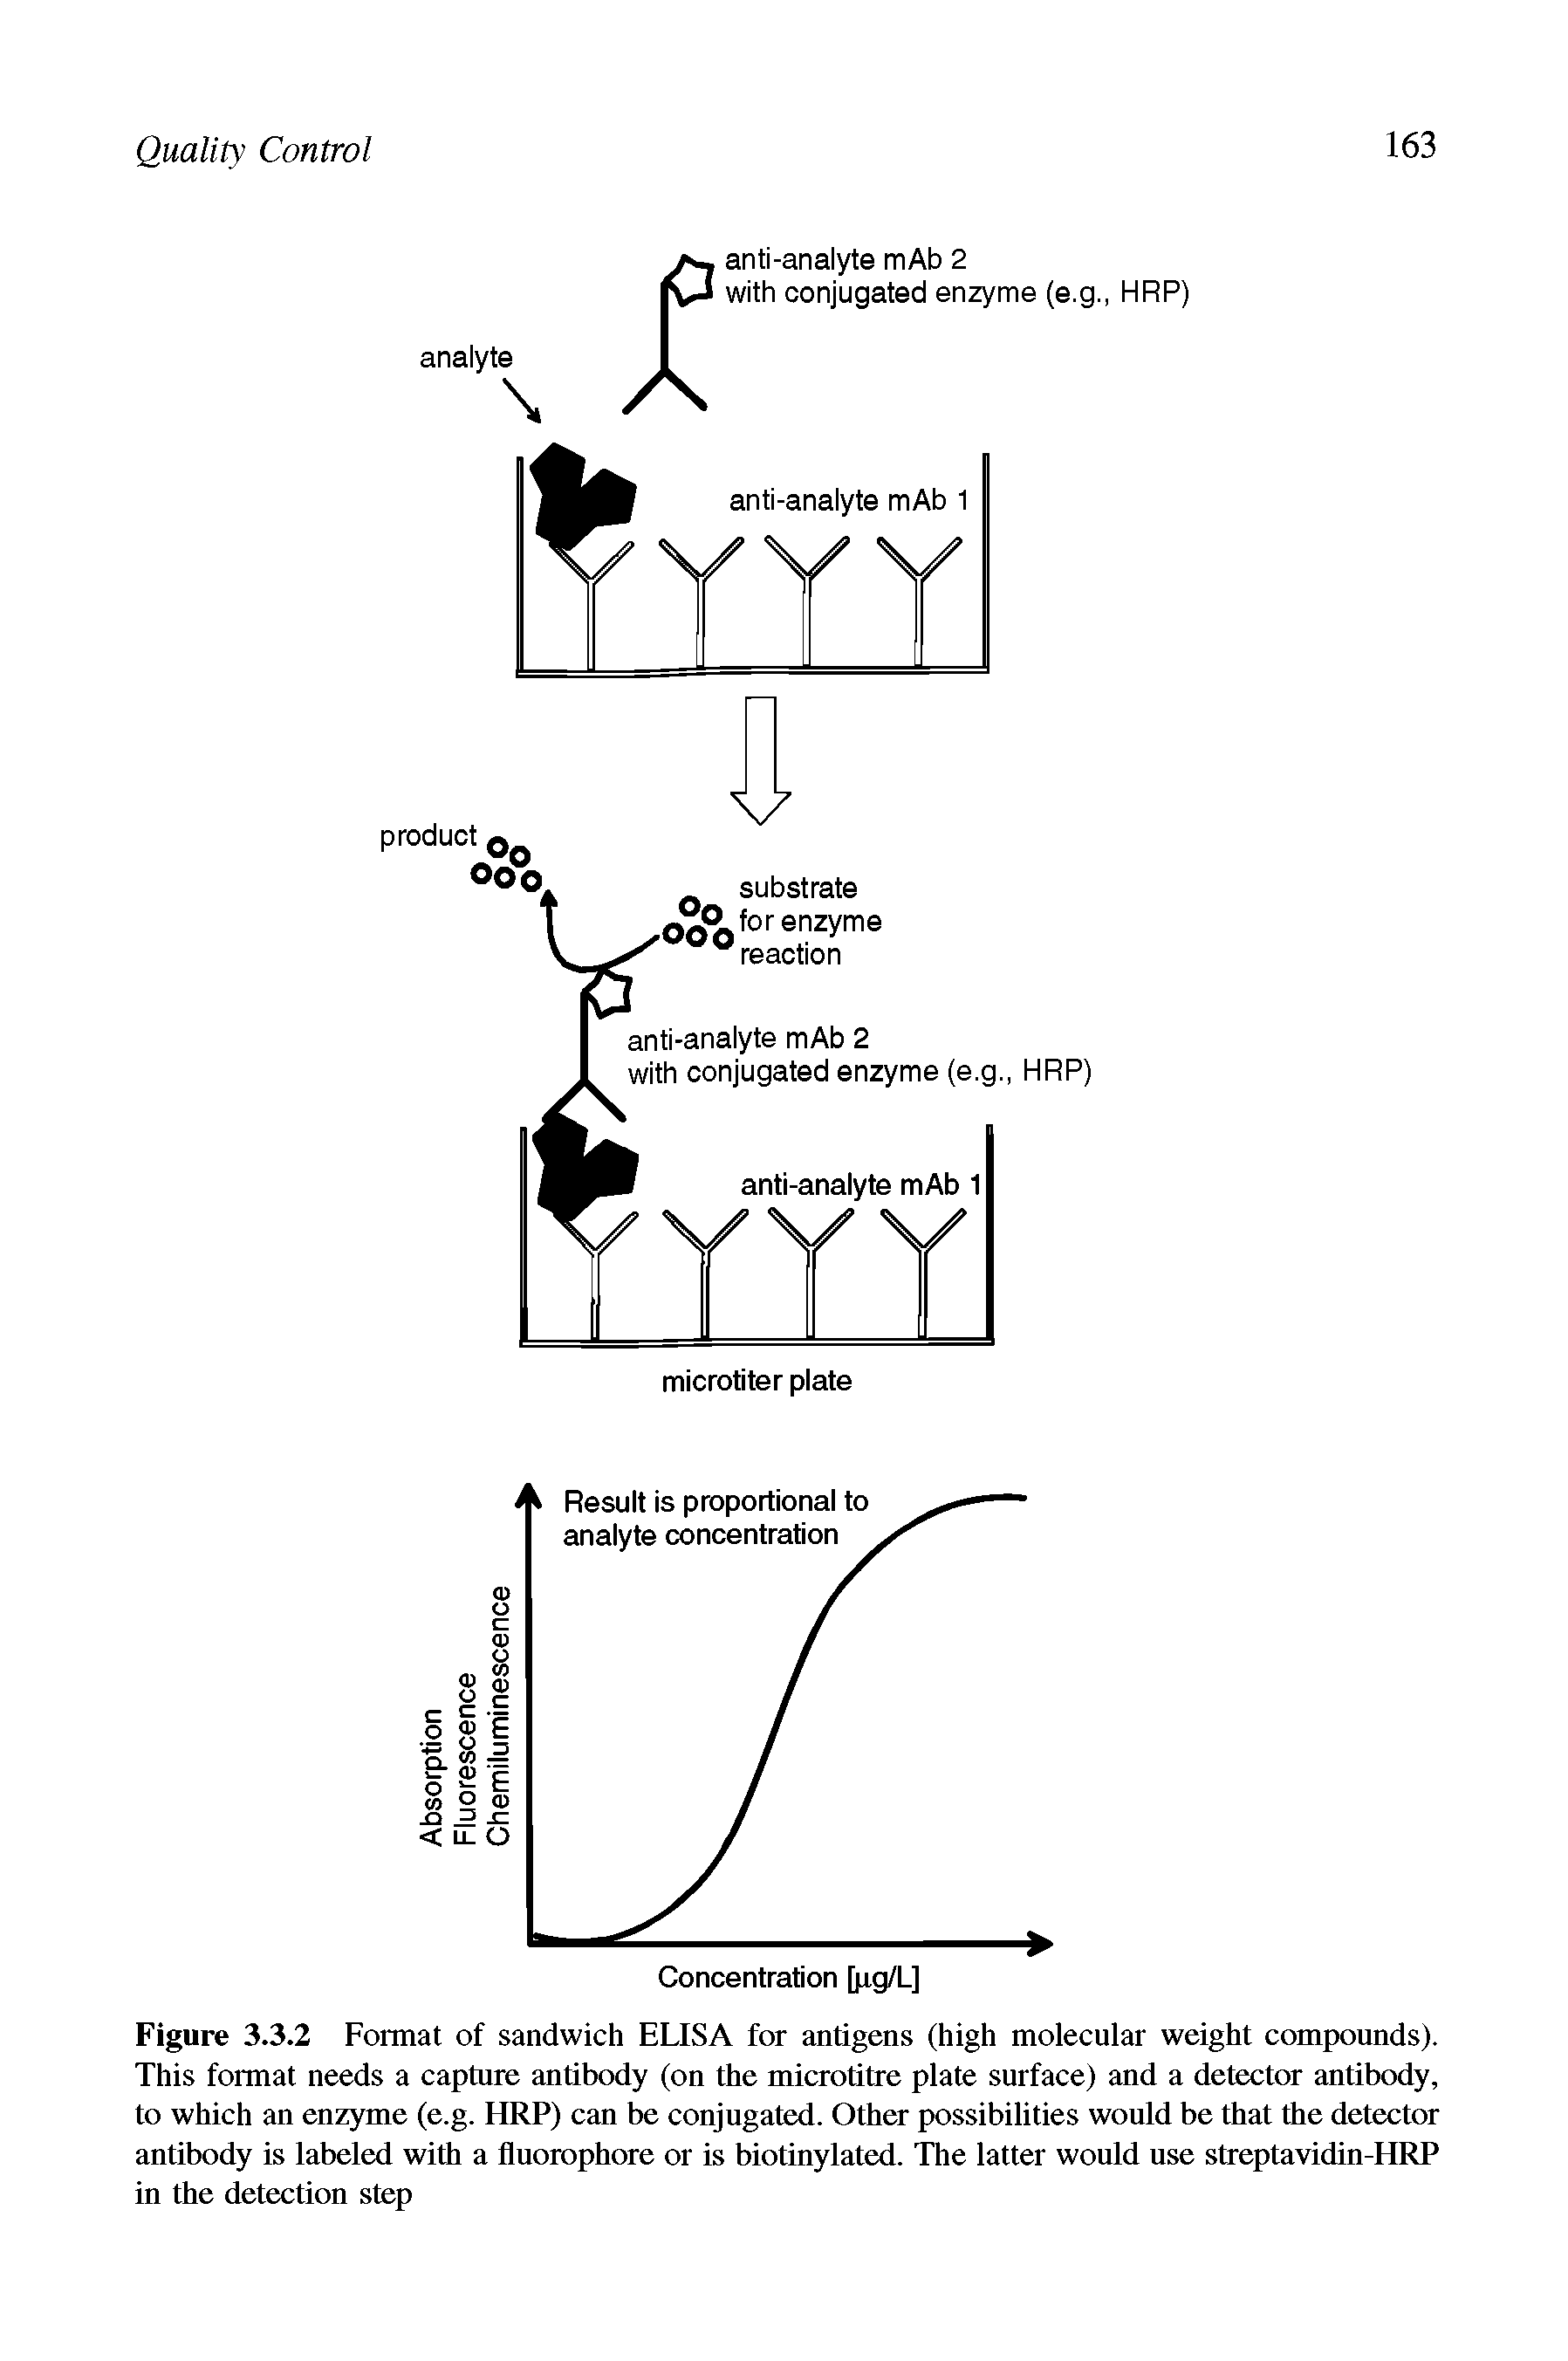 Figure 3.3.2 Format of sandwich ELISA for antigens (high molecular weight compounds). This format needs a capture antibody (on the microtitre plate surface) and a detector antibody, to which an enzyme (e.g. HRP) can be conjugated. Other possibilities would be that the detector antibody is labeled with a fluorophore or is biotinylated. The latter would use streptavidin-HRP in the detection step...